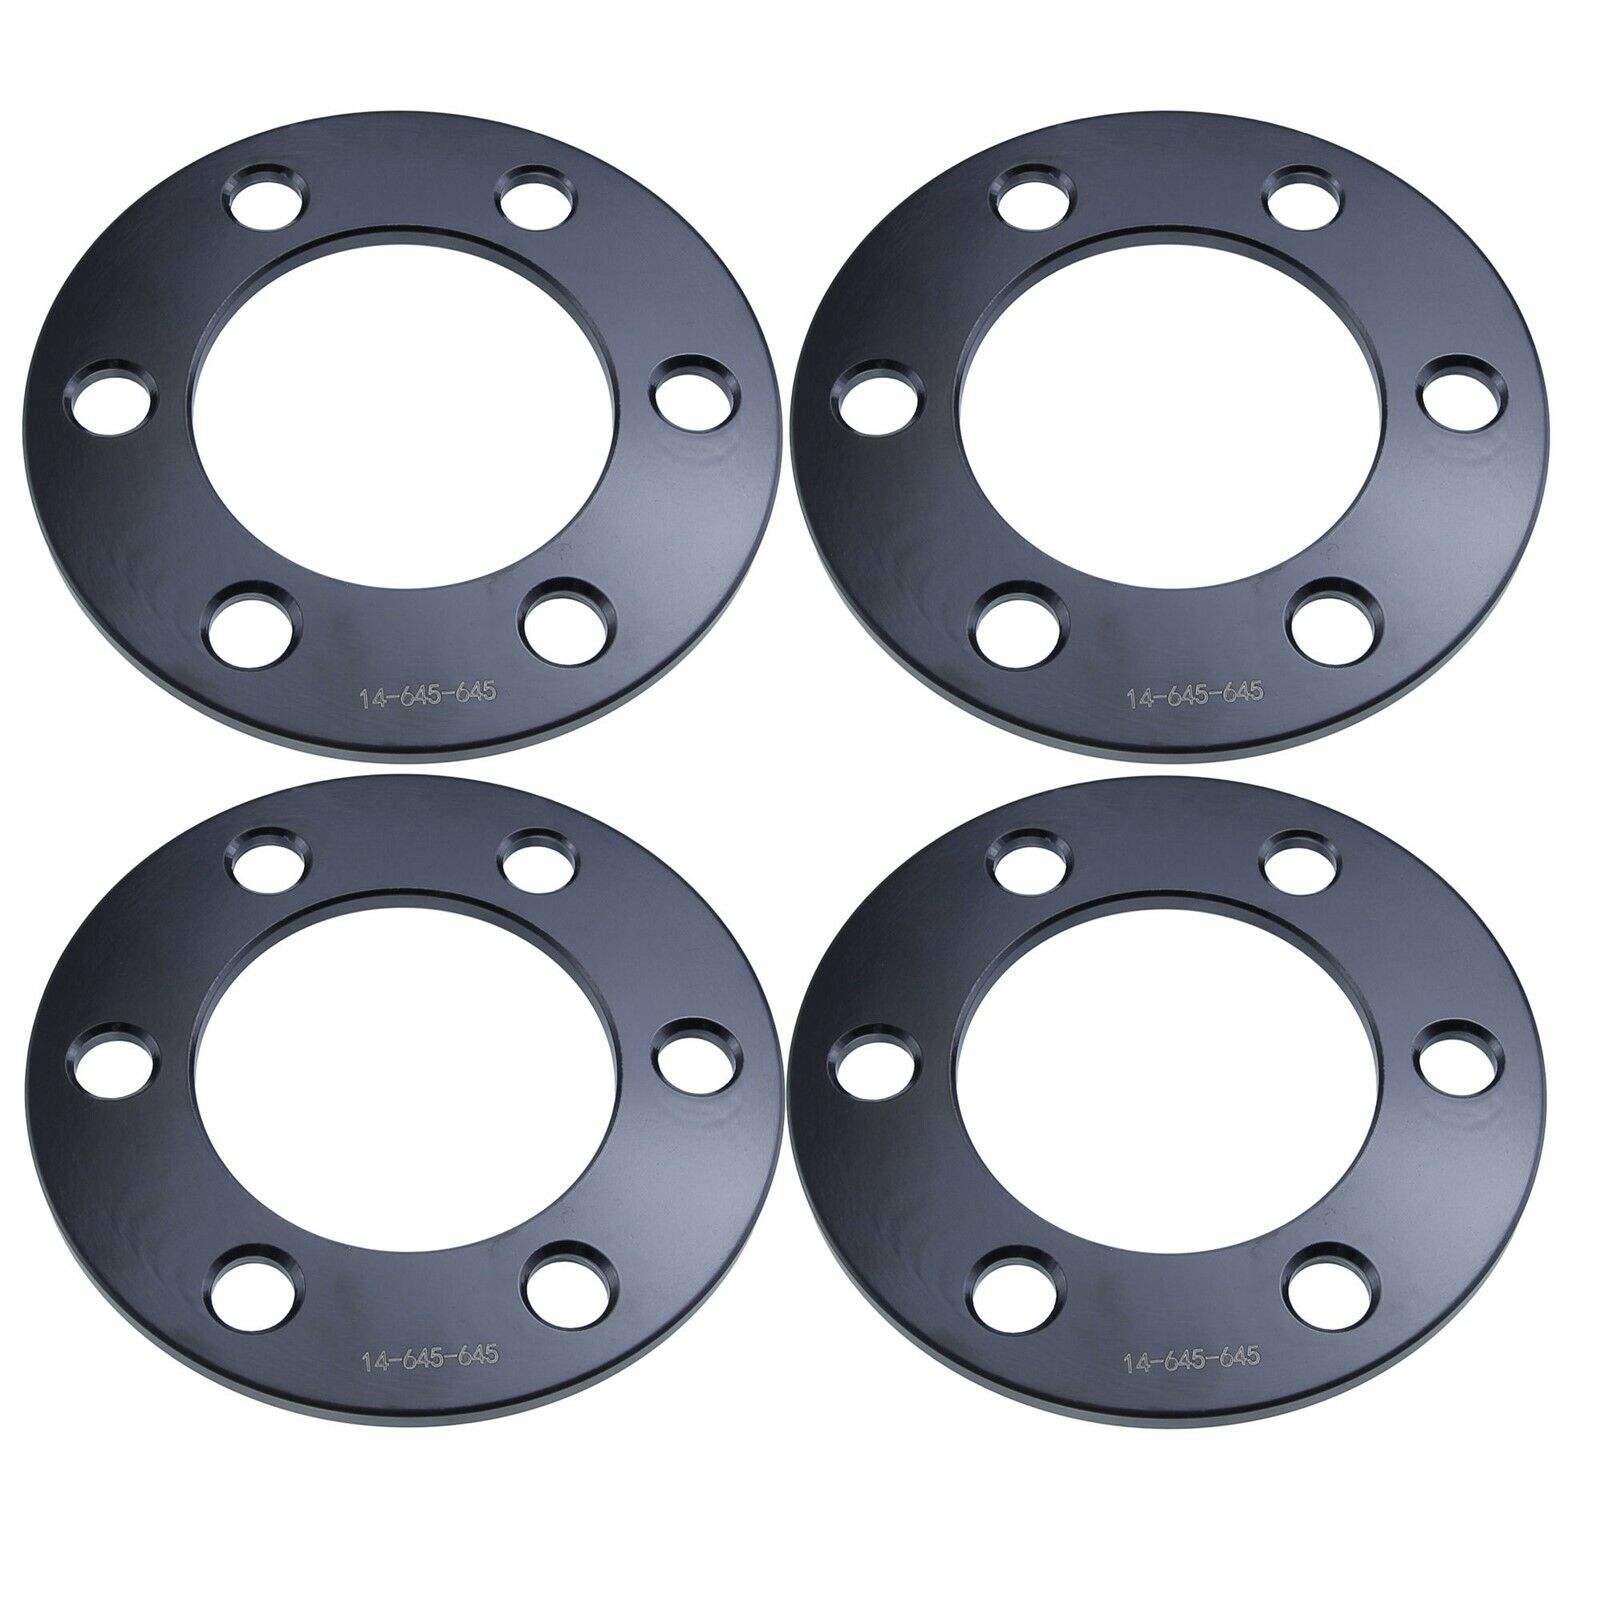 4pcs 6x4.5 1/4 Flat Forged Wheel Spacers Fits Nissan Frontier Pathfinder Xterra